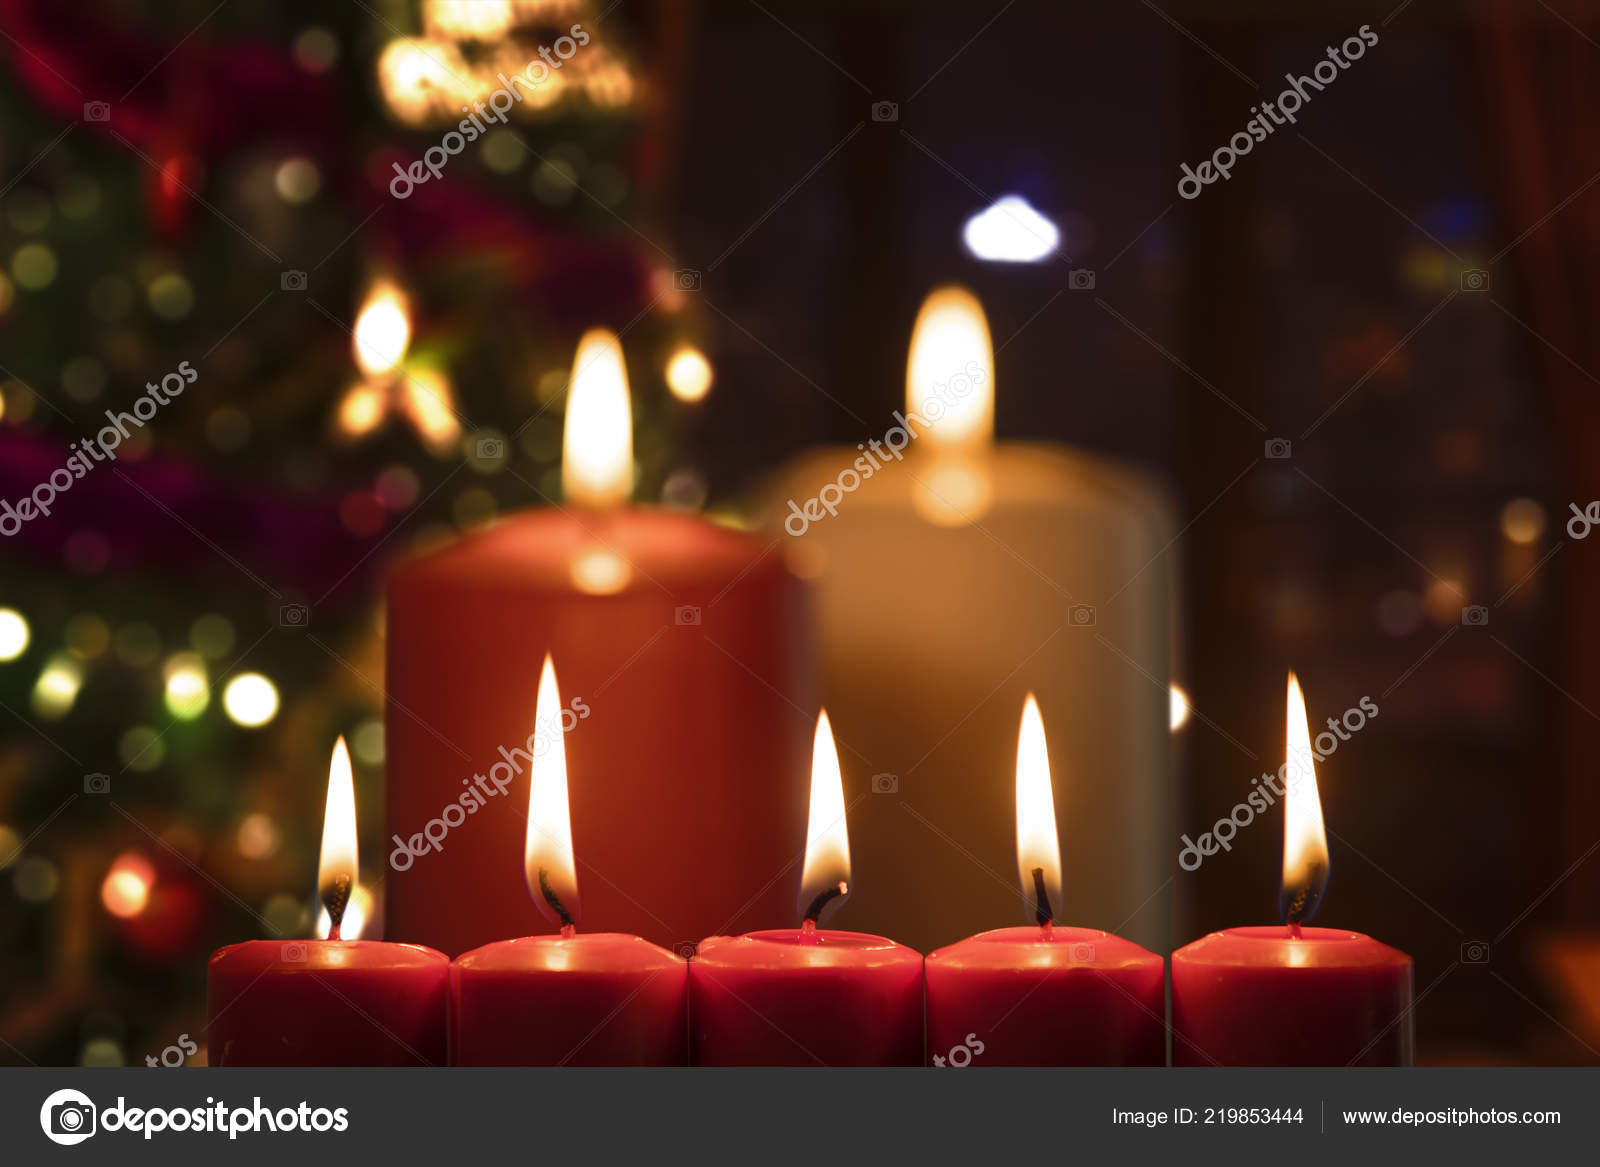 Red White Christmas Candles Burning Table Blurred Christmas Tree